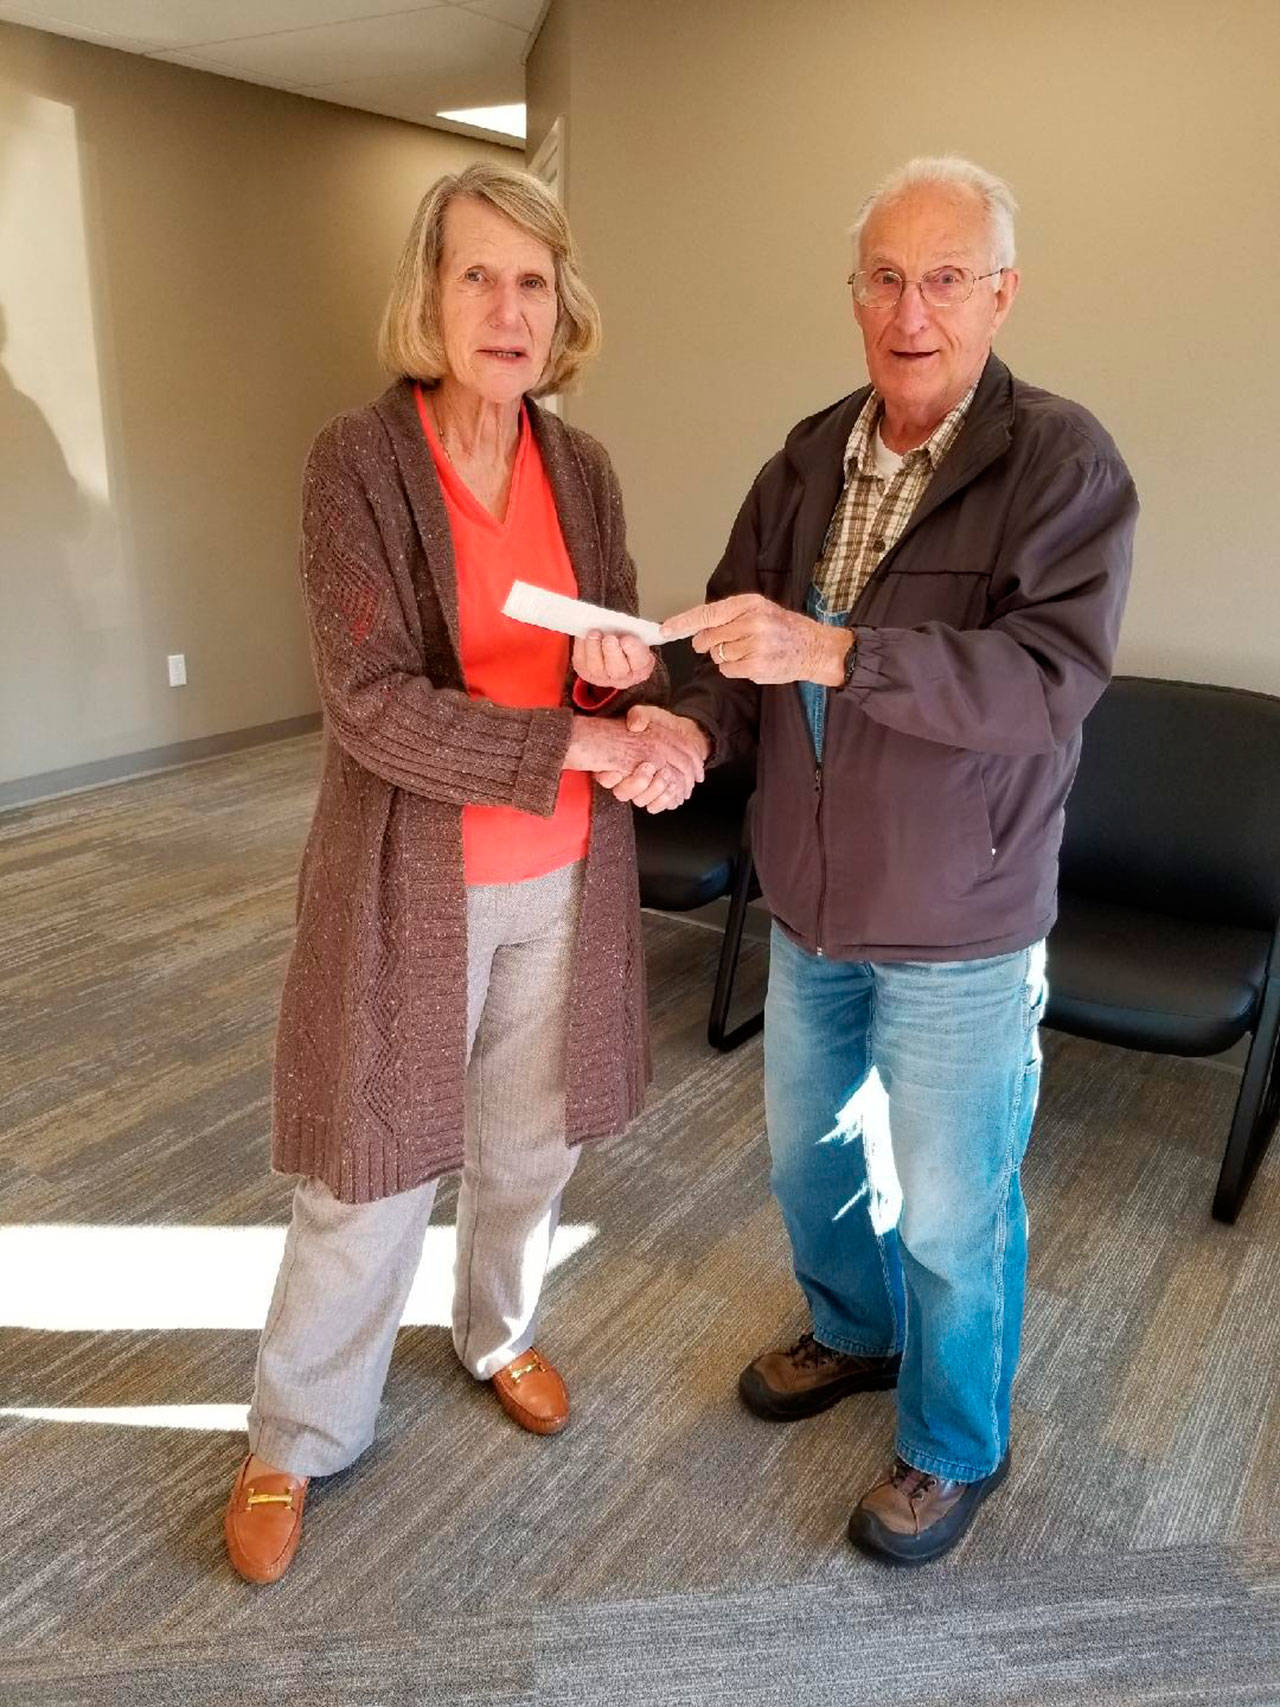 $500 donated to Volunteer Hospice of Clallam County